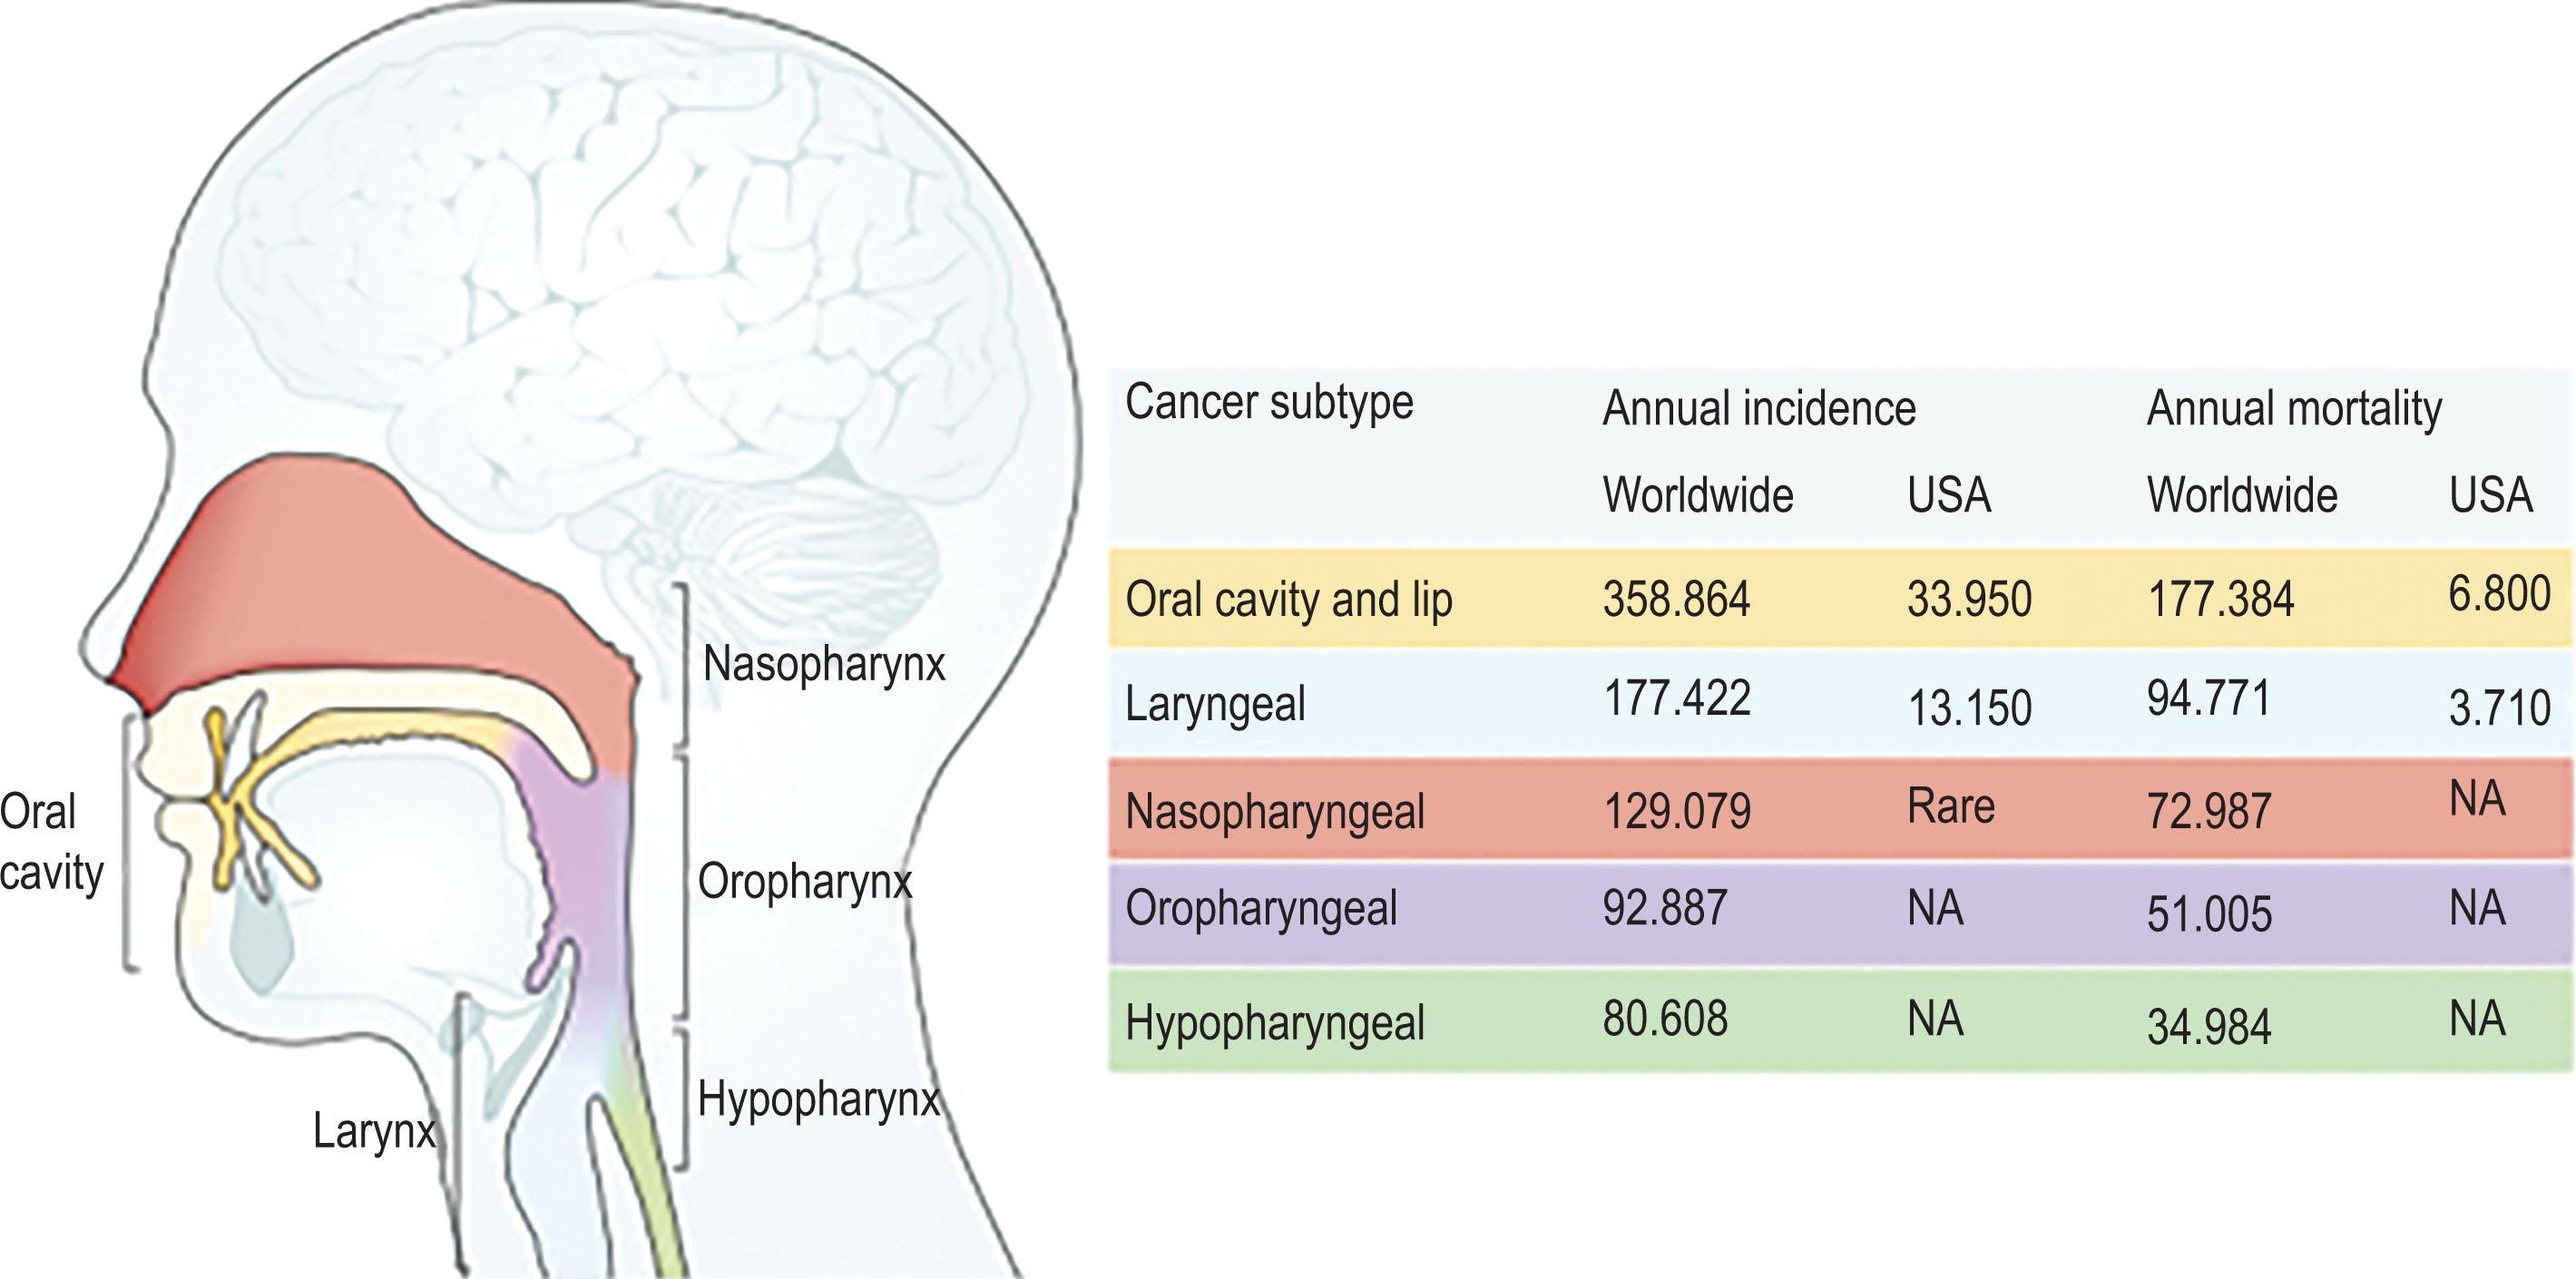 Figure 8.2, Incidence and mortality rates for patients with head and neck squamous cell carcinoma (HNSCC). Results of worldwide and US investigations of the epidemiology of HNSCC are shown; national databases frequently group different subtypes together (for example, oral cancers and pharyngeal cancers). For this reason, some oropharyngeal cancers of the base of the tongue can be misclassified as cancers of the oral cavity. Furthermore, the incidence of human papillomavirus (HPV)-associated oropharyngeal cancer is regionally specific: HPV accounts for 70% of oropharyngeal cancers in the US and for 10% in low-income and middle-income countries. The incidence of nasopharyngeal cancer is included as it significantly impacts the global burden of head and neck cancer, particularly in Southeast Asia, although the incidence is low in the US. NA, Not applicable.